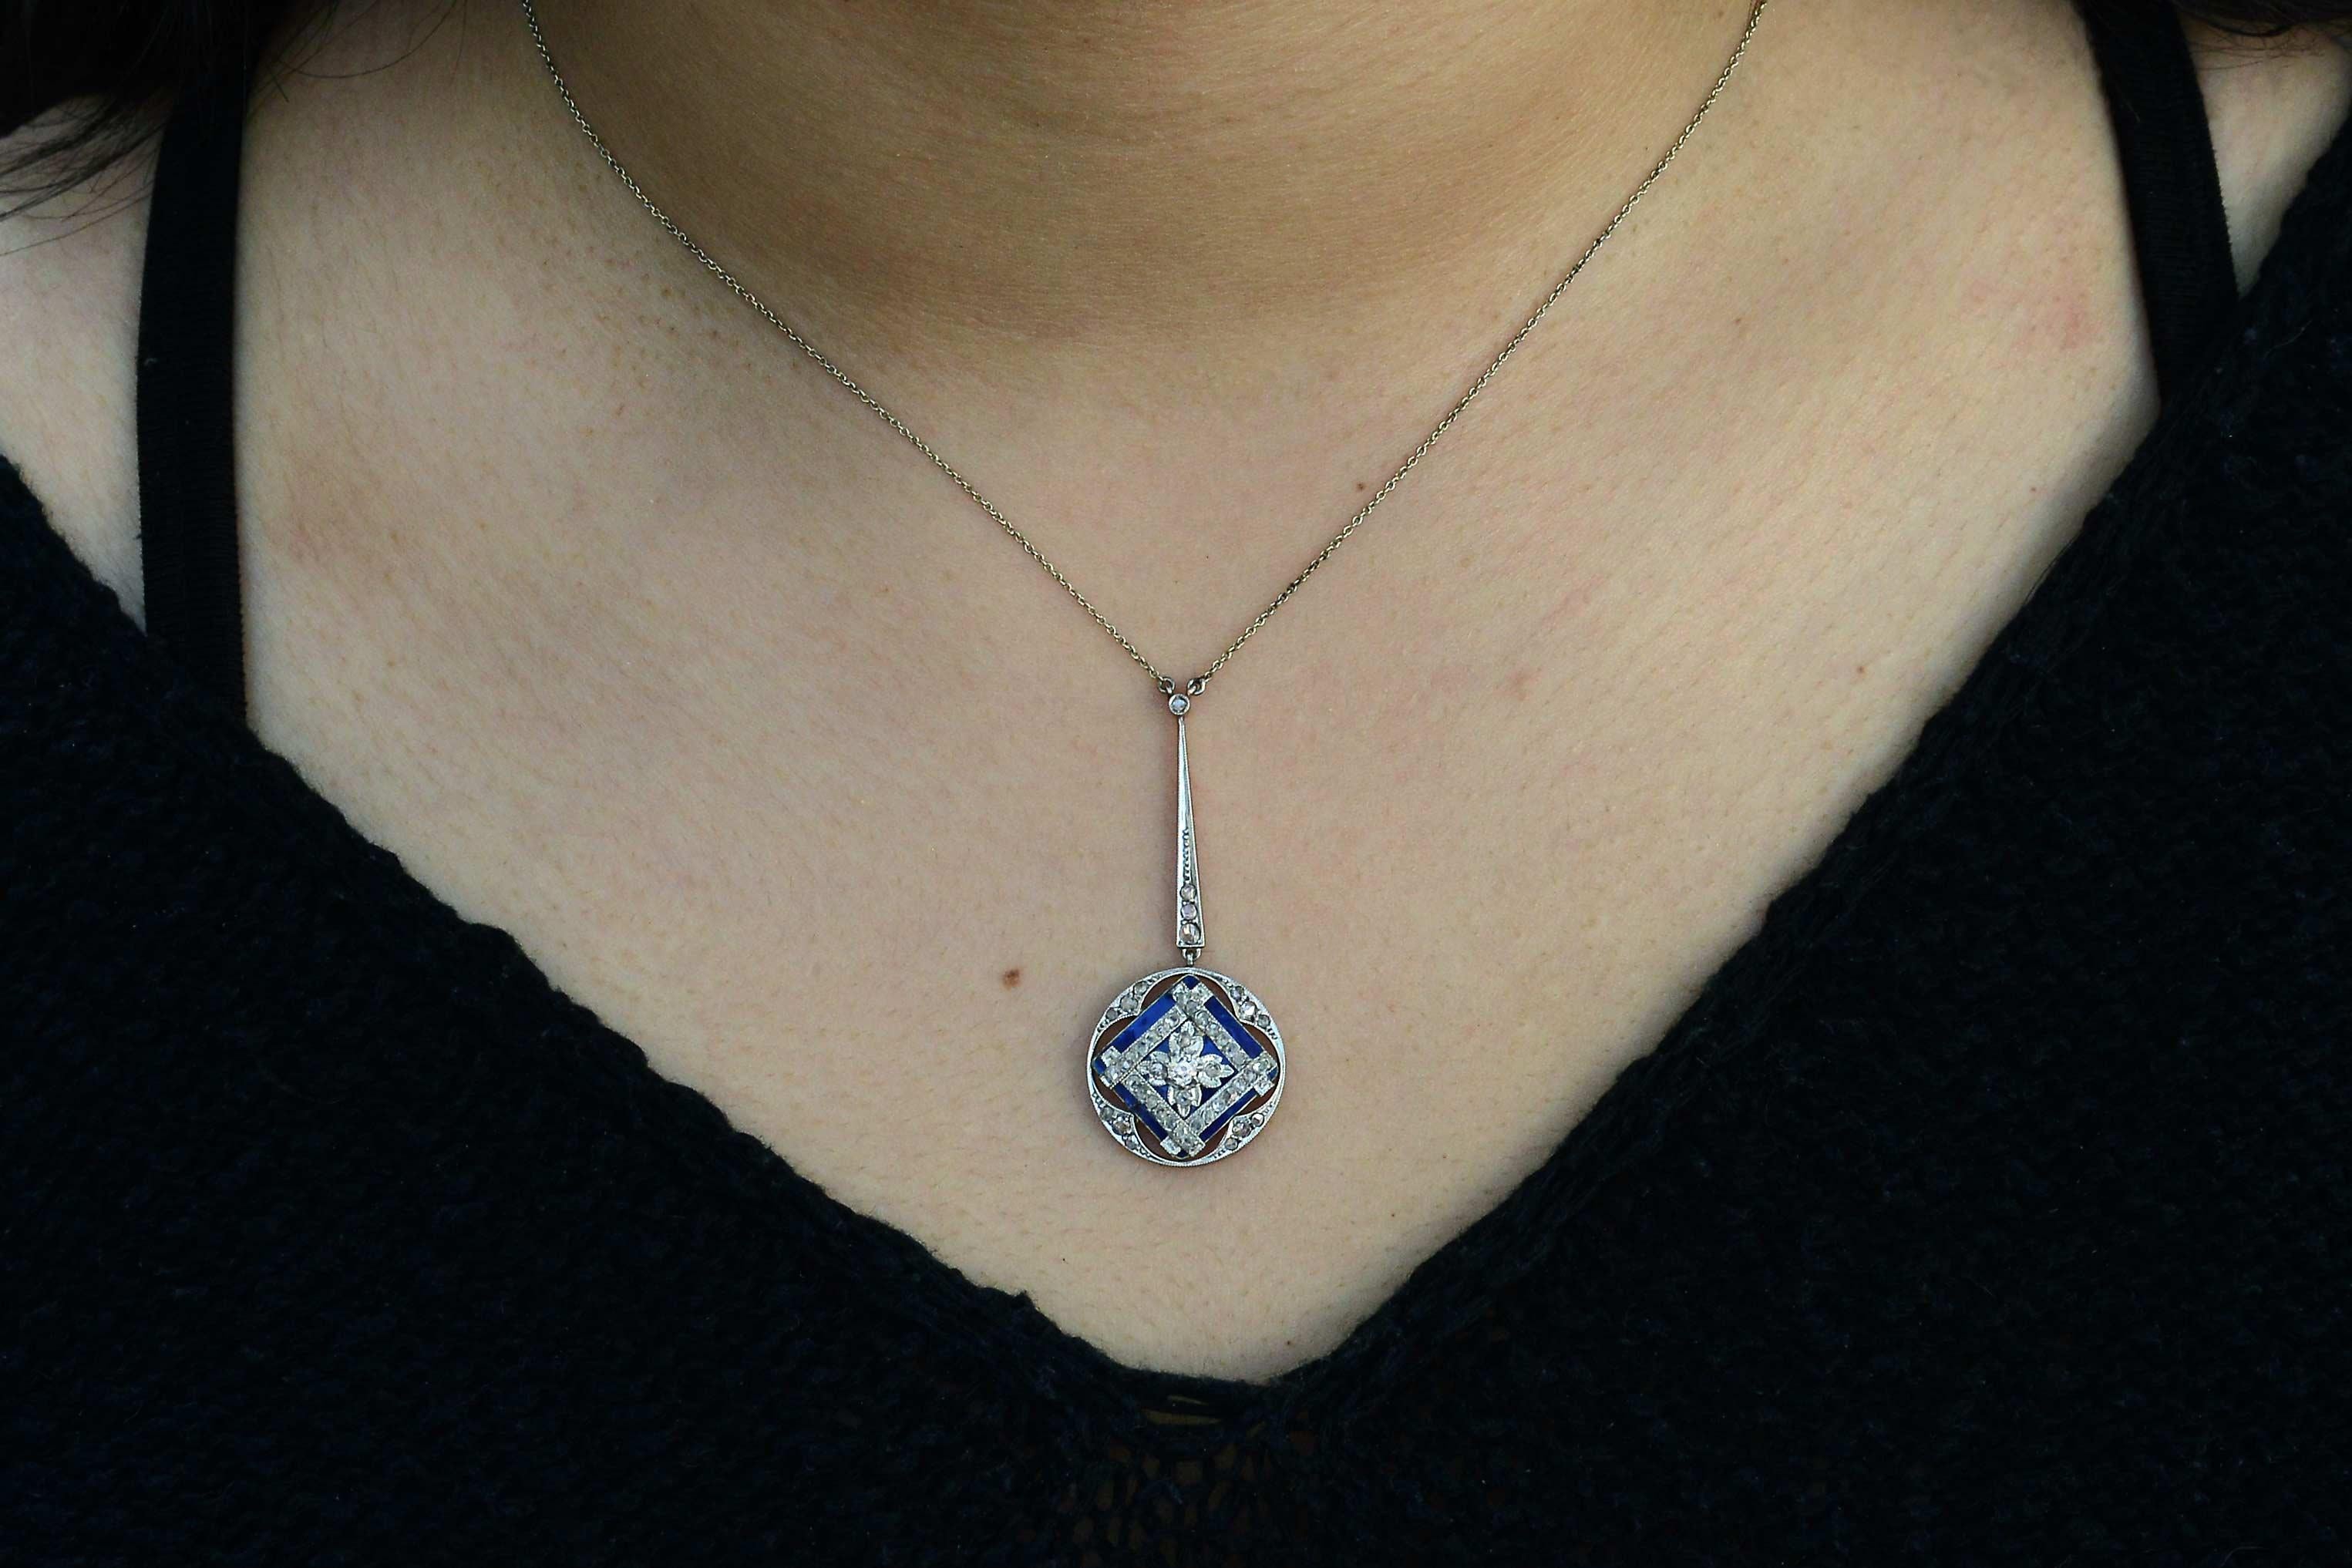 A stunning antique, this lavalier style necklace is eminently wearable. With a velvety blue enamel serving as the canvas for the 40 rose cut diamonds set in an interesting lattice pattern. The drop style filigree pendant dangles from a single,